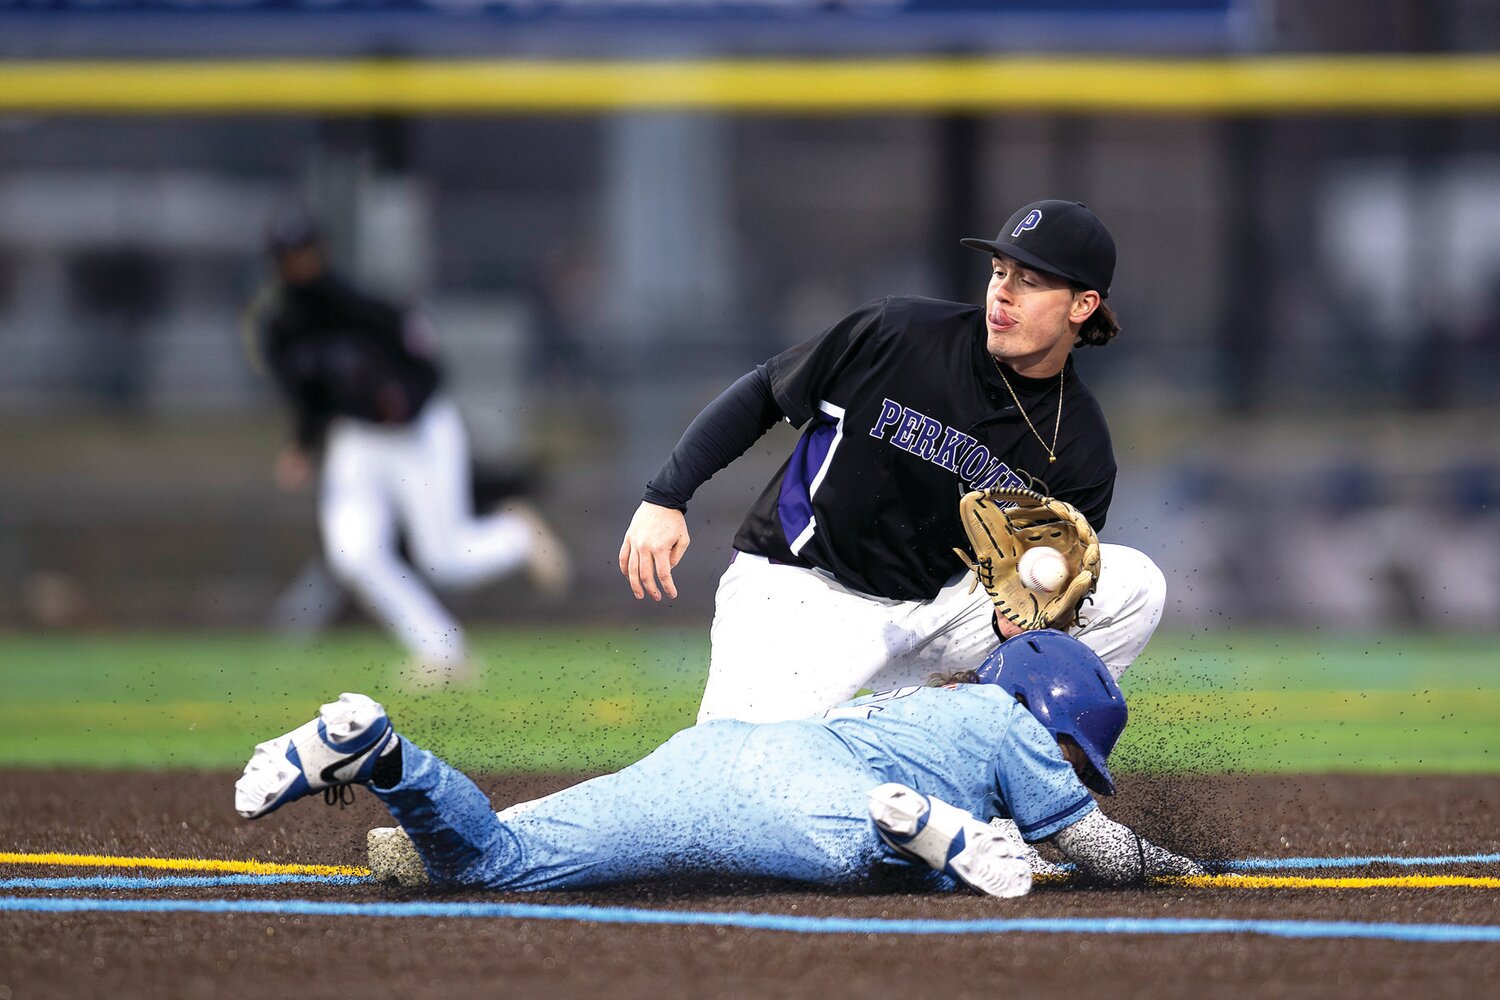 Perkiomen School’s Ryan Stubblefield fields a throw as Quakertown’s Danny Qualteria steals second base in the first inning.